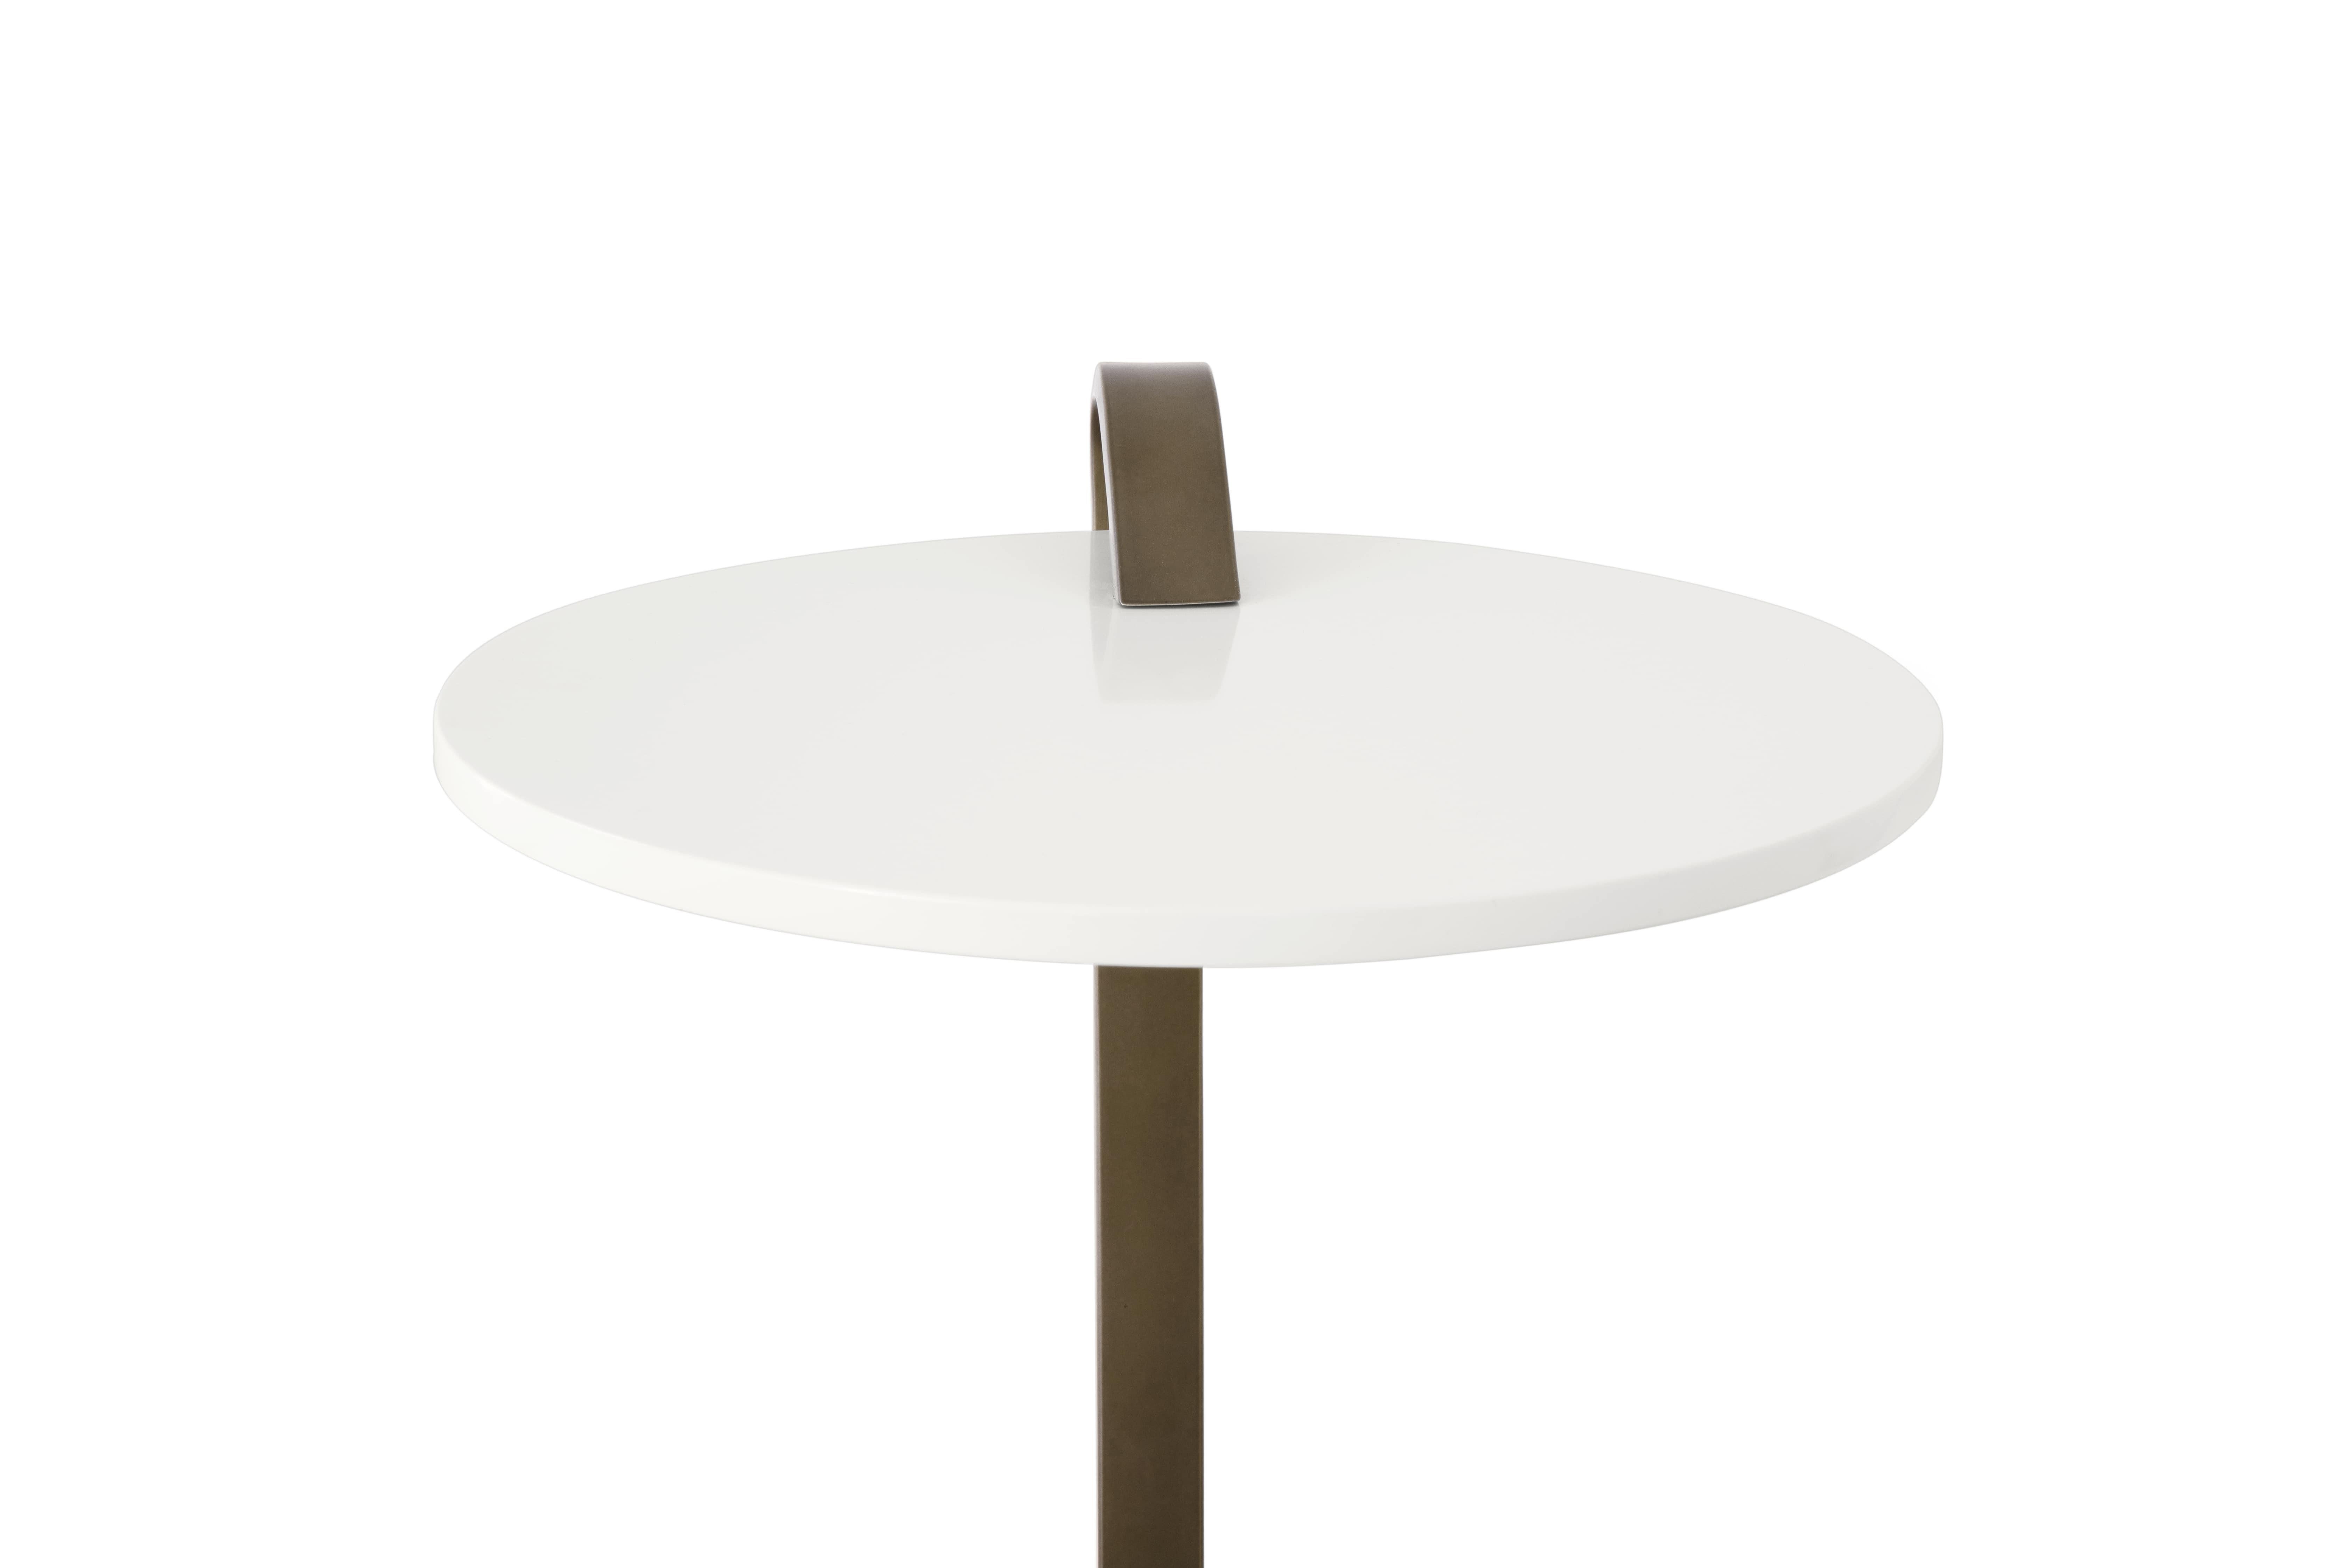 Minimalist Cream Glossy Lacquer Cutty Side Table by Caffe Latte In New Condition For Sale In New York, NY